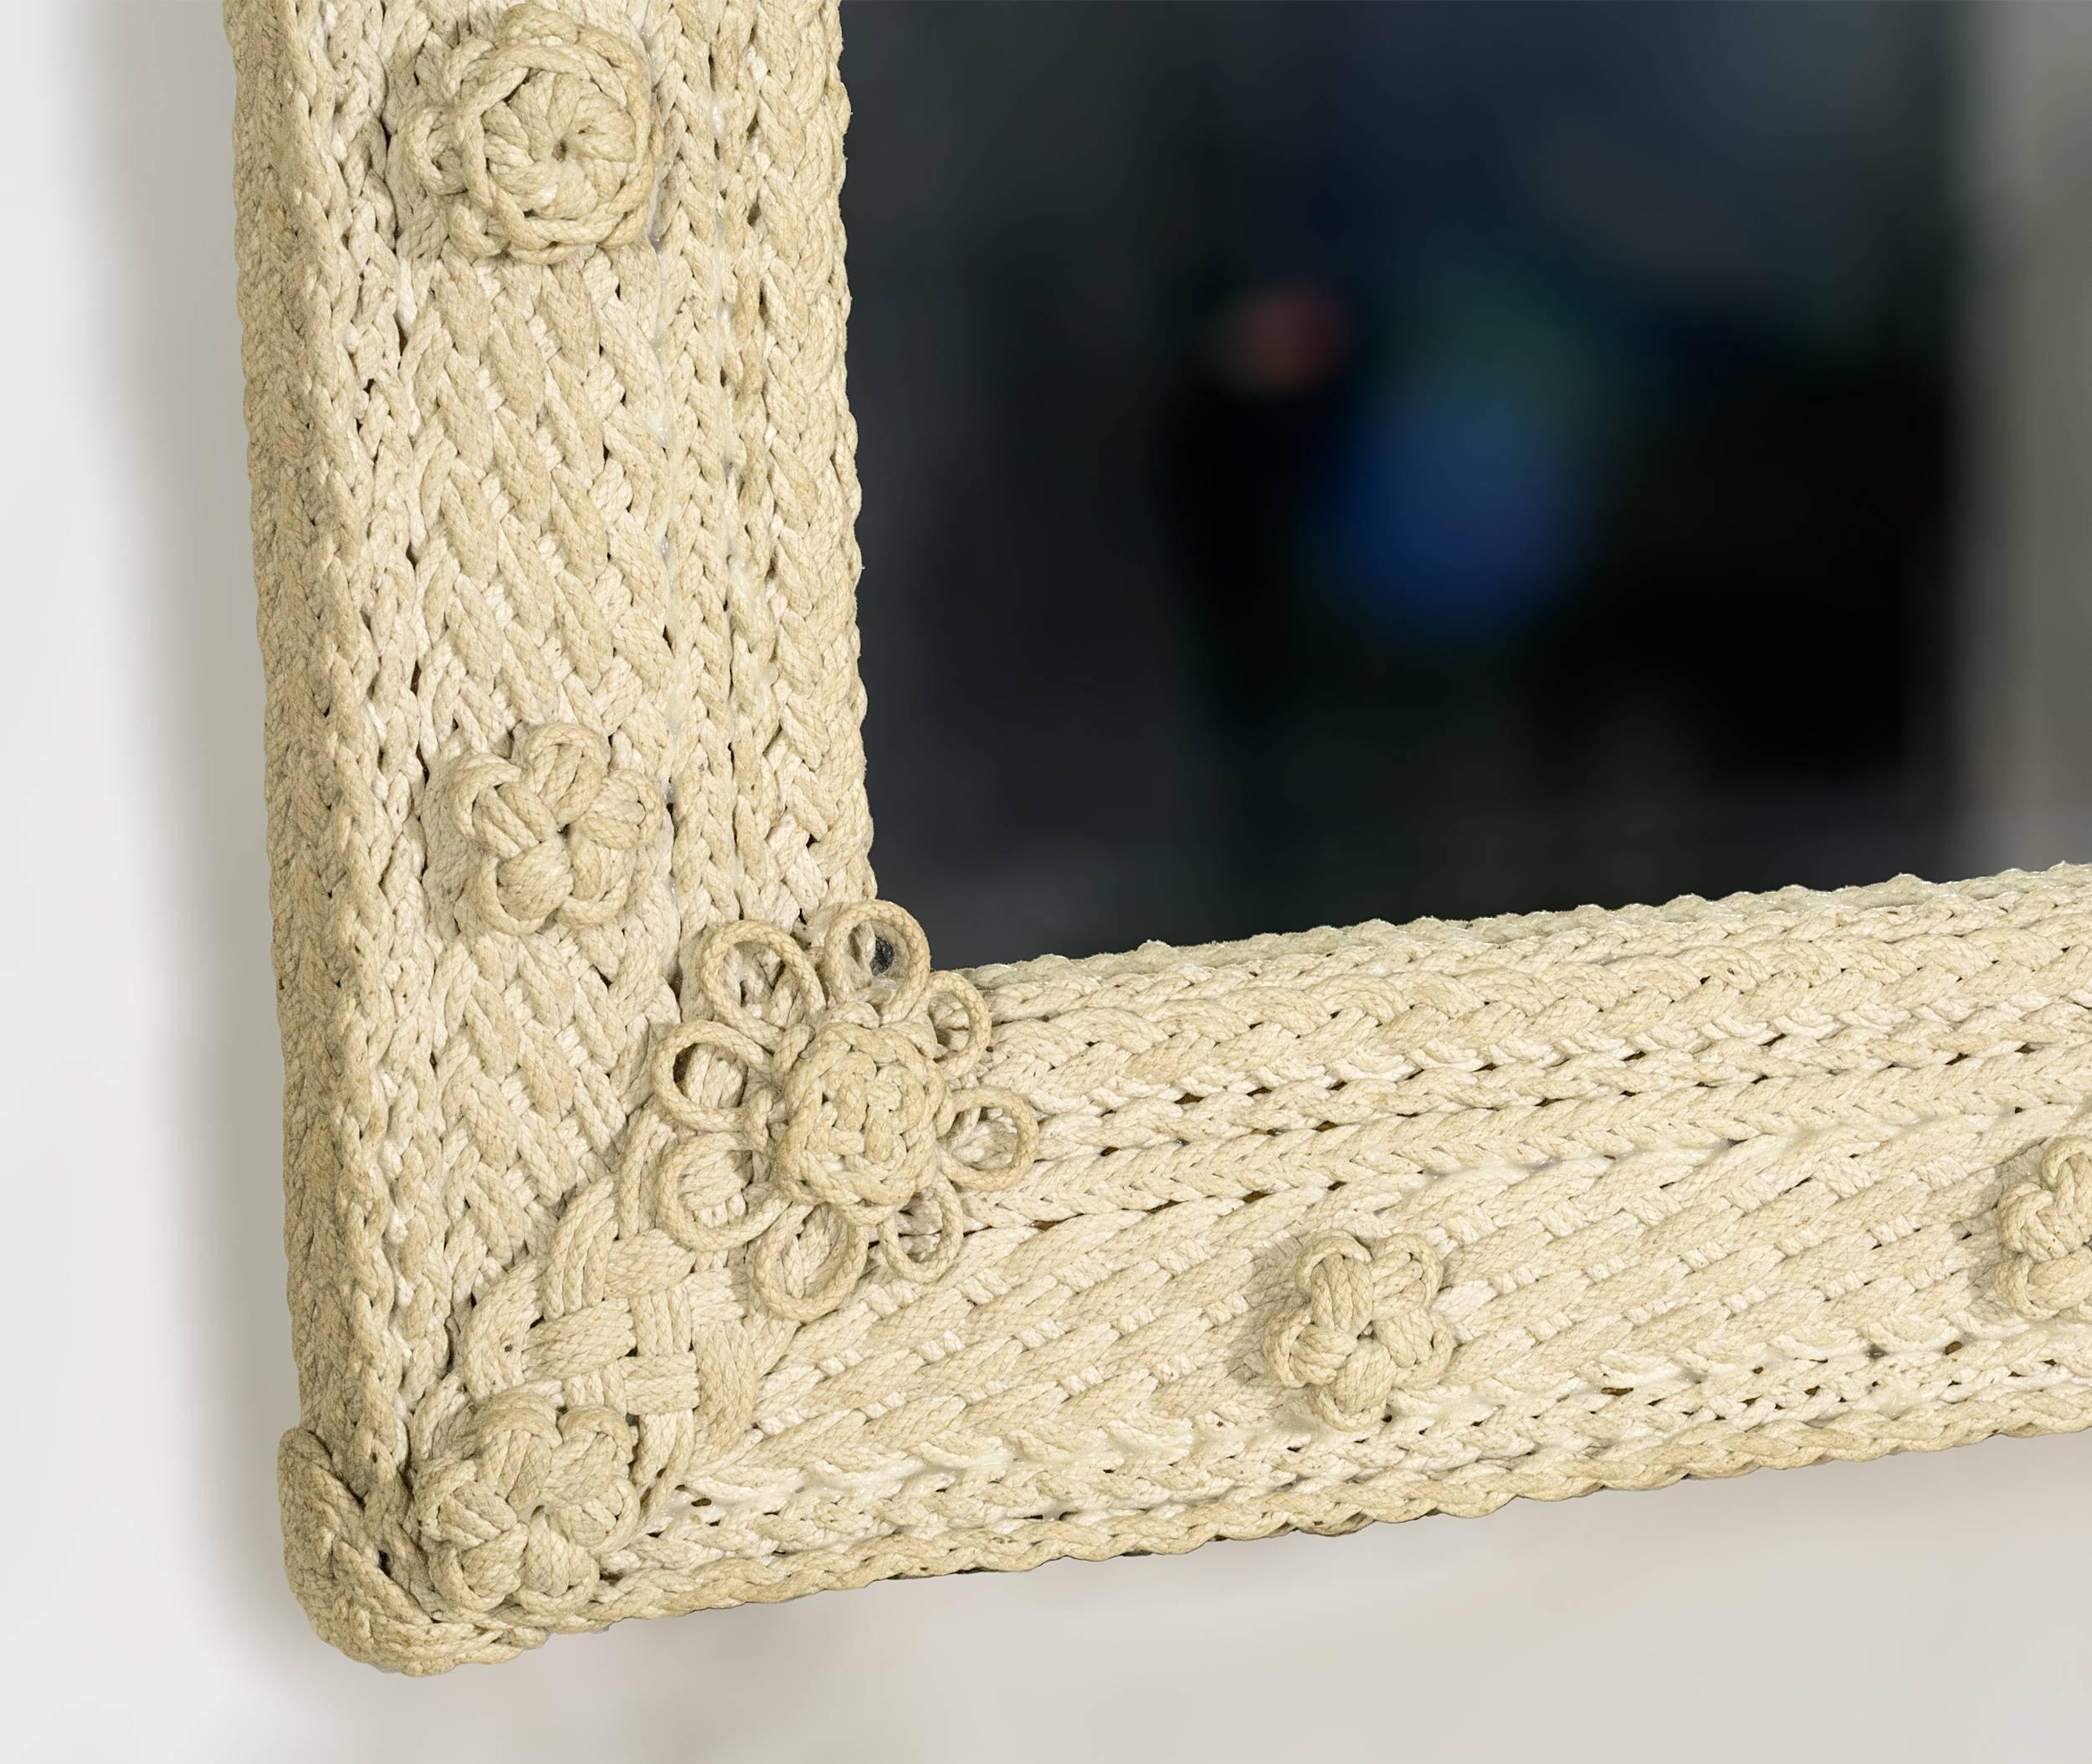 Intricate knotwork frame in great condition. Can be hung either vertically or horizontally.
 